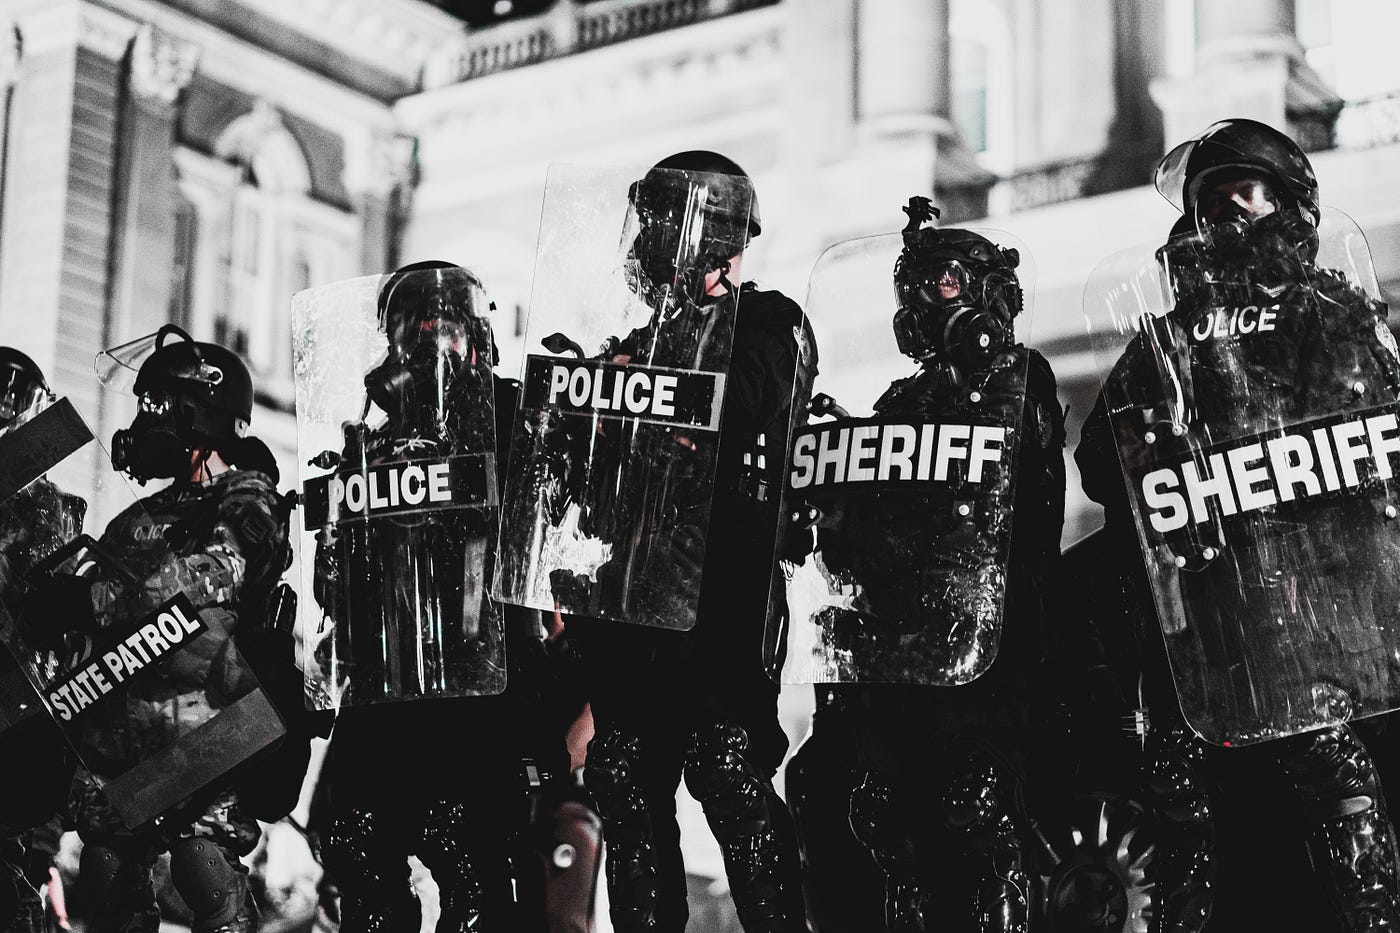 Police officers clash with protesters during the 2020 Floyd protests